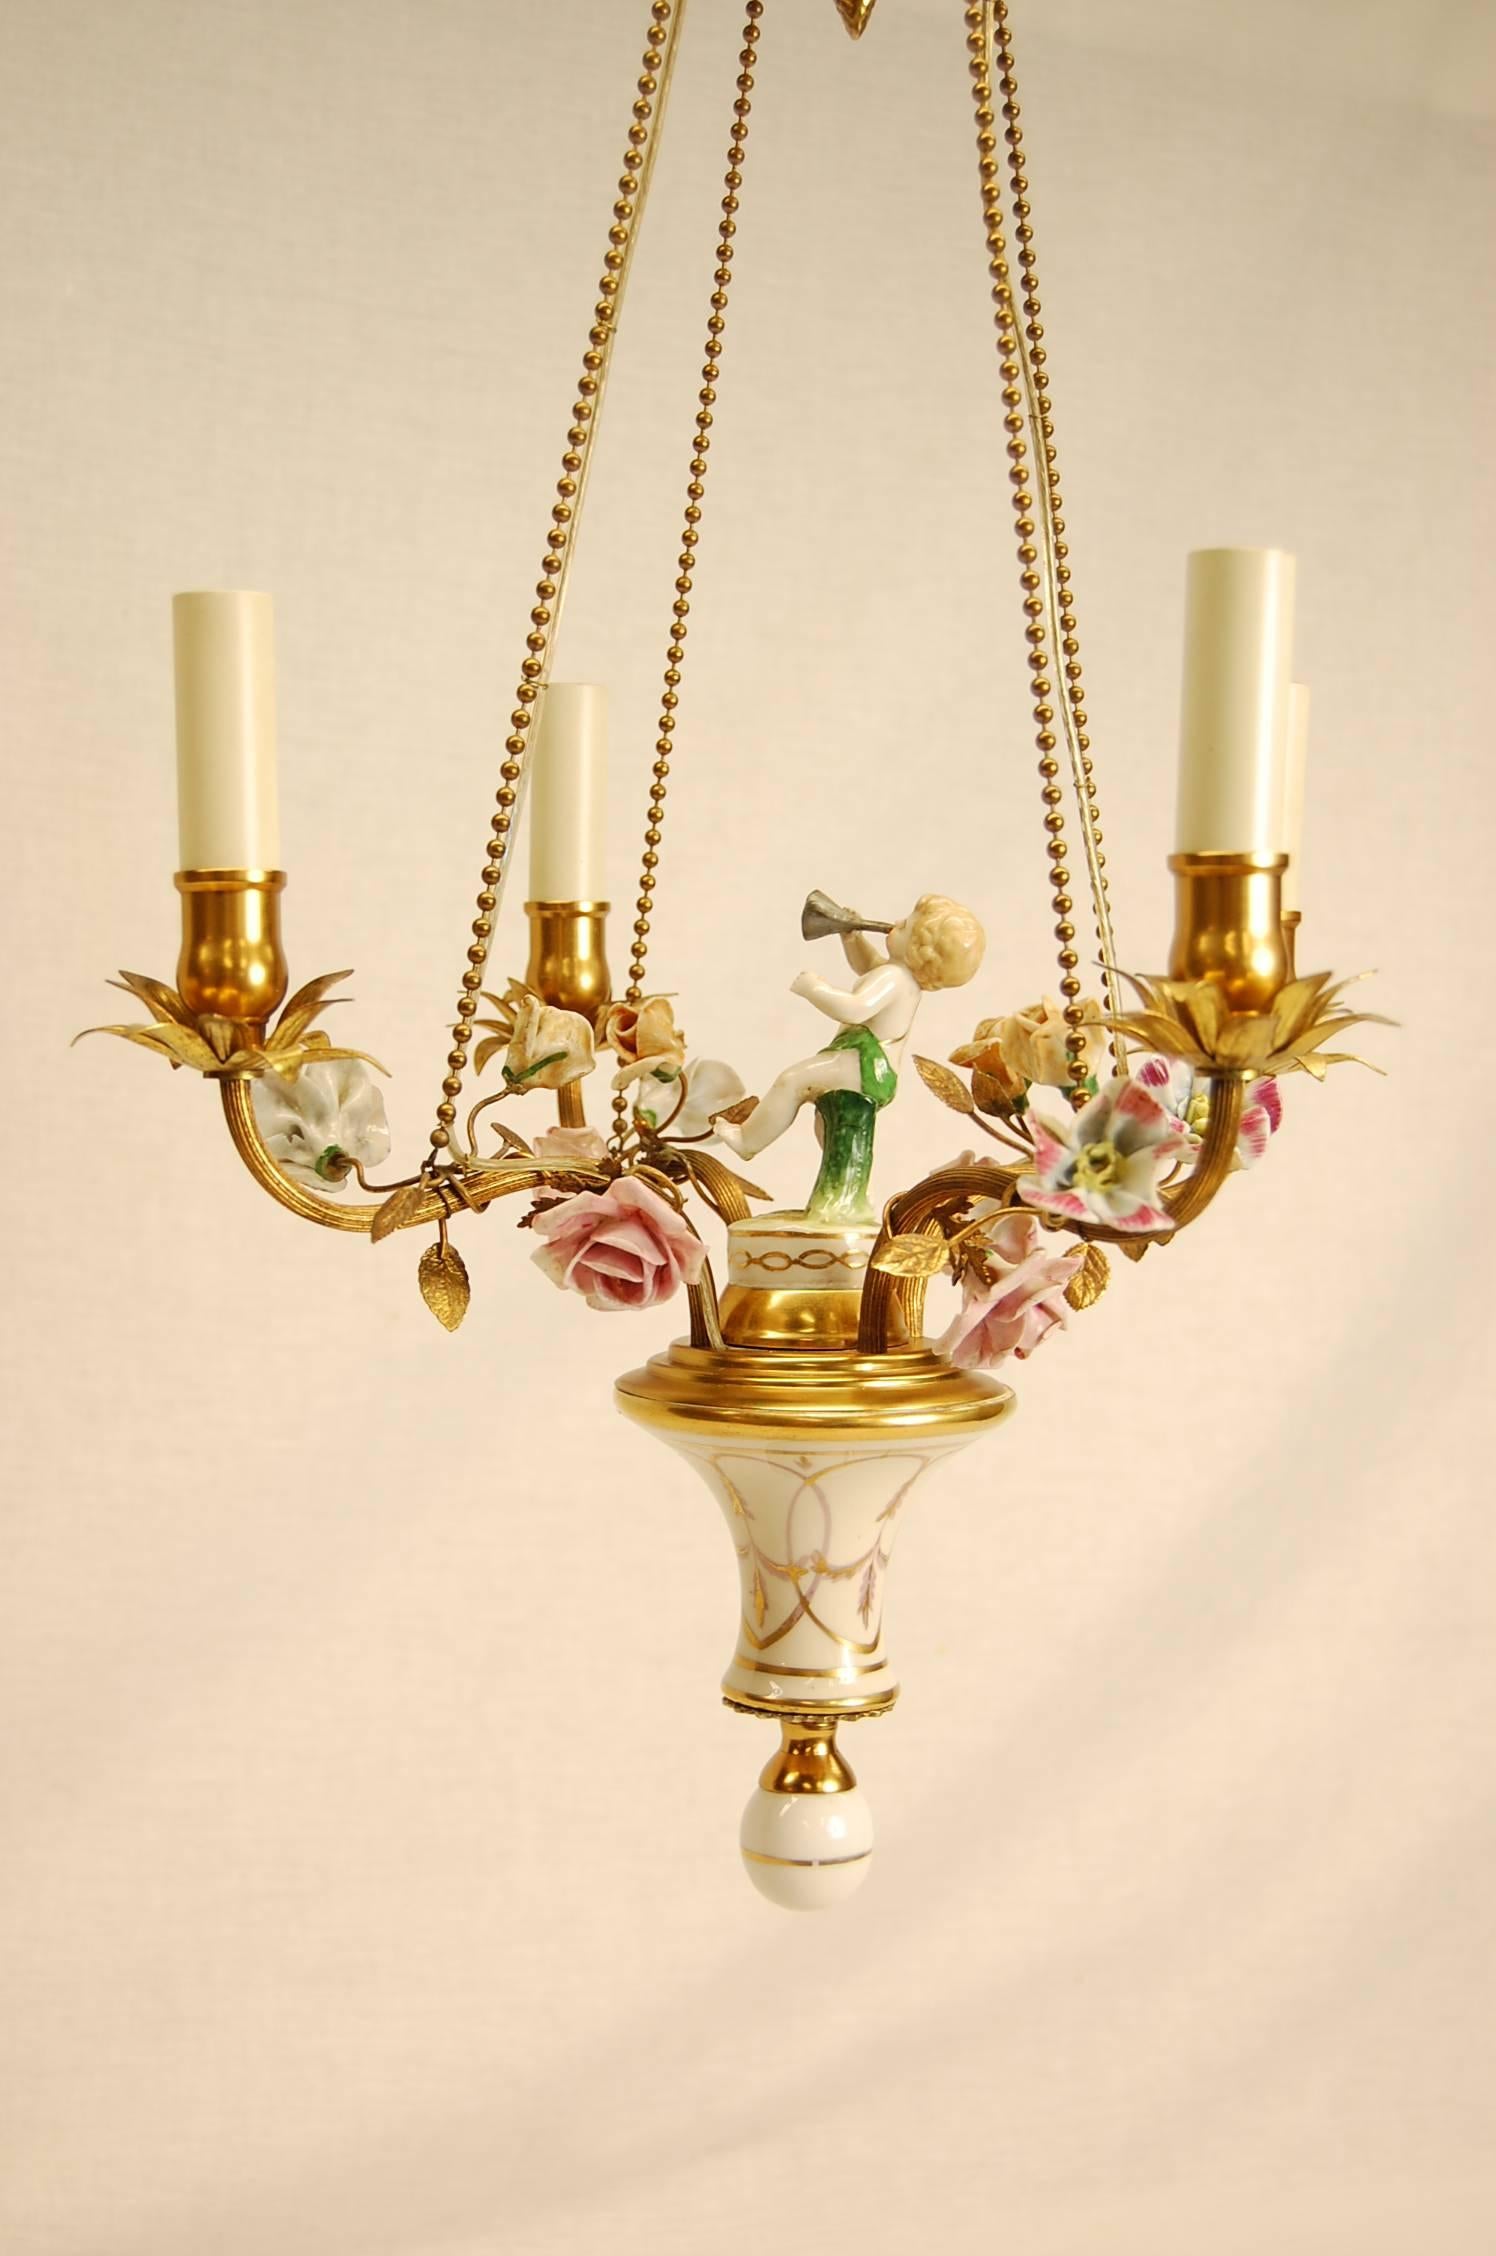 Pretty four-light chandelier with porcelain flowers and figure in excellent condition.